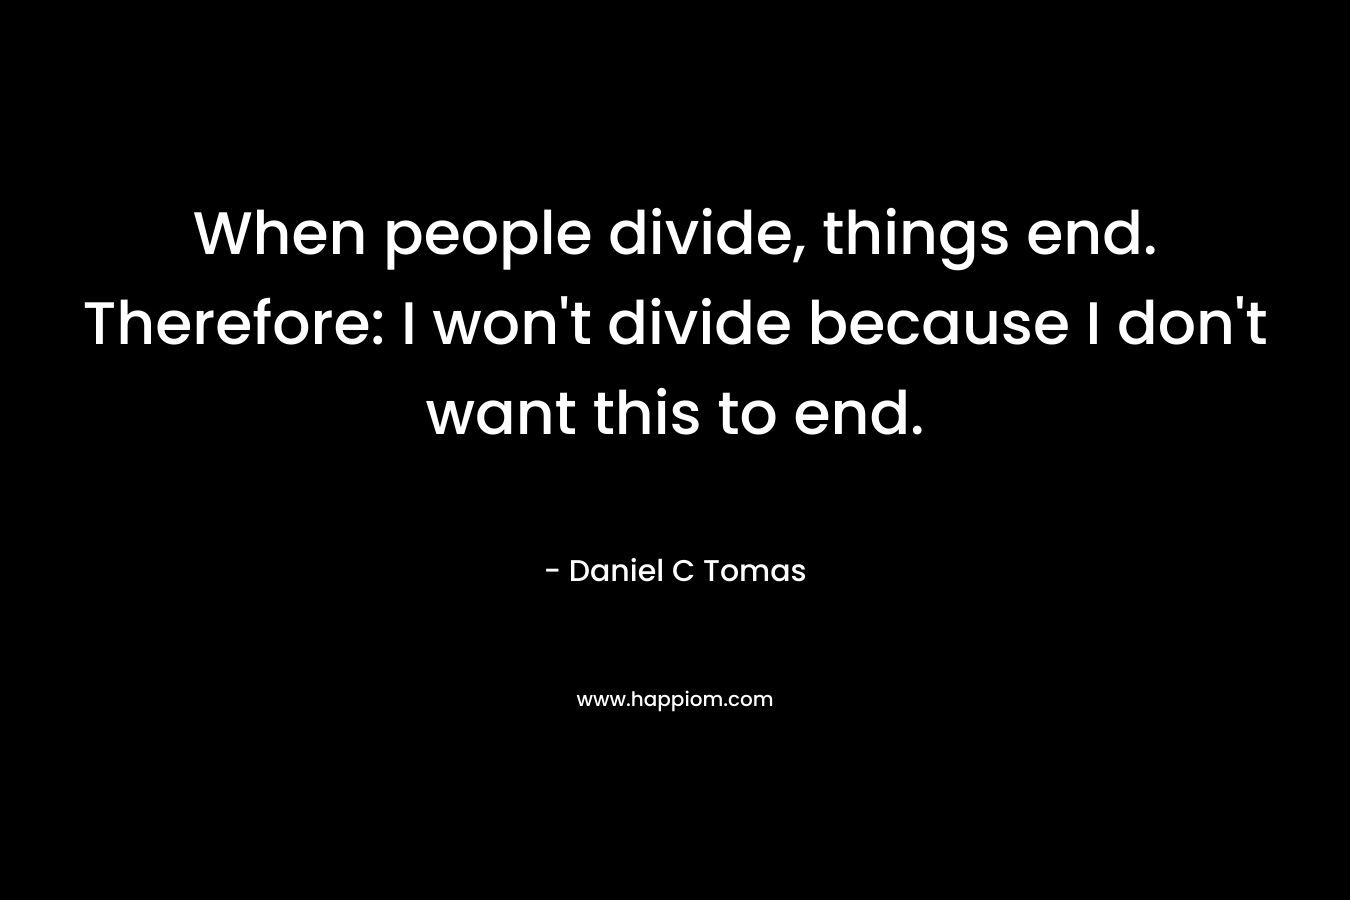 When people divide, things end. Therefore: I won't divide because I don't want this to end.